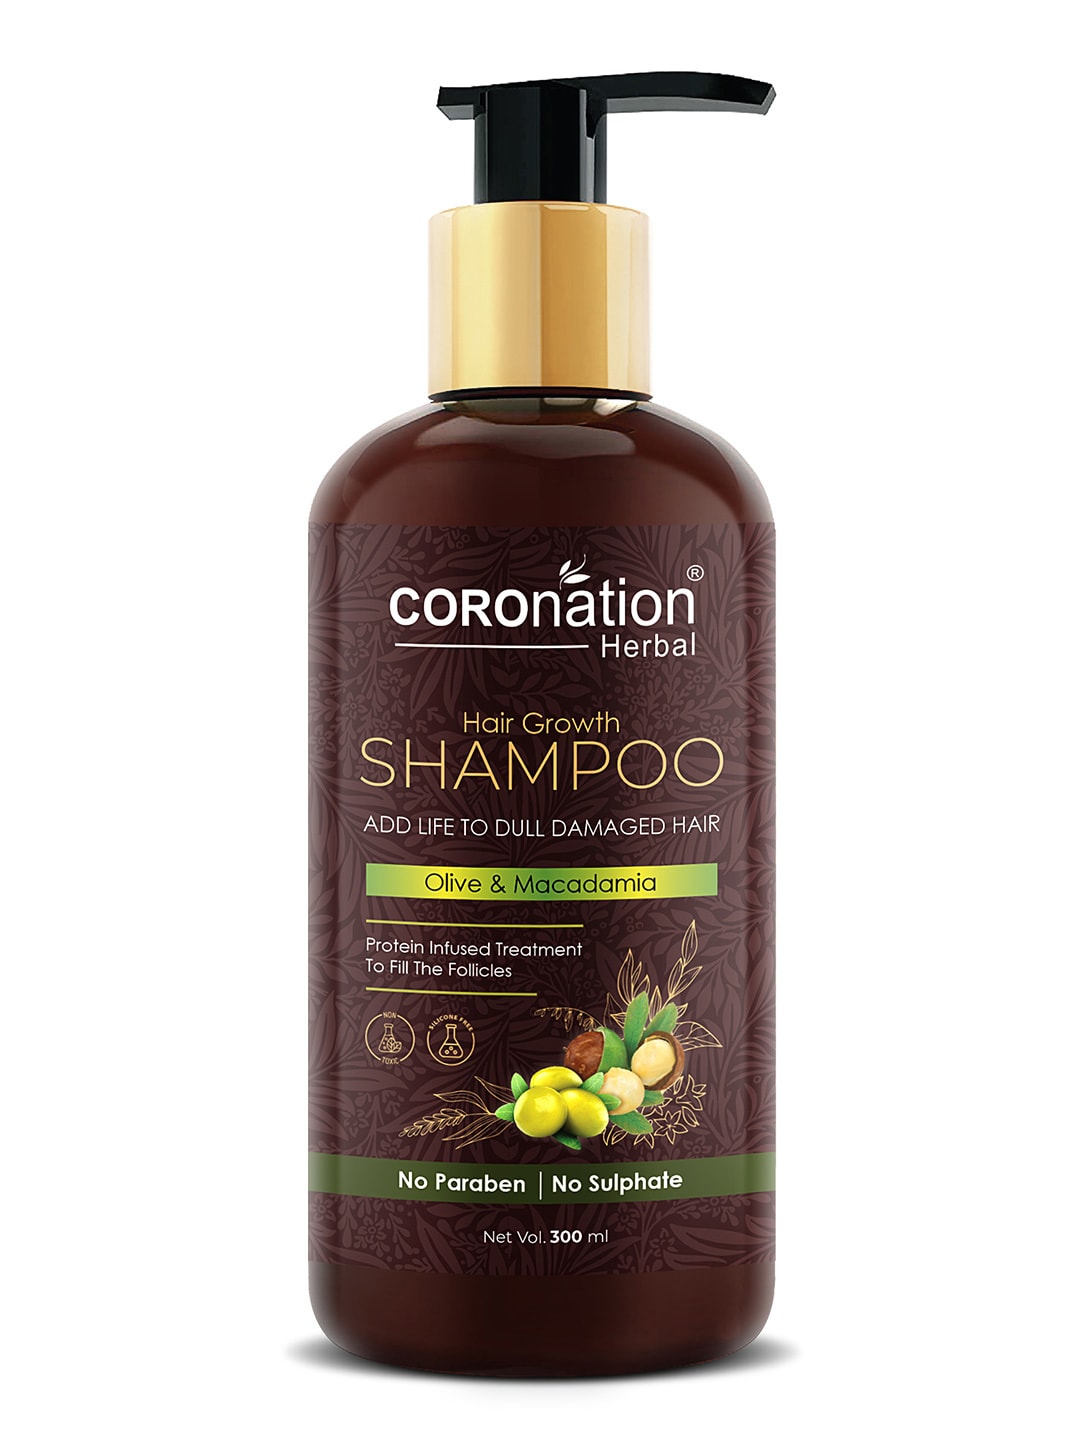 COROnation Herbal Hair Growth Shampoo With Olive & Macadamia Oil - 300 ml Price in India